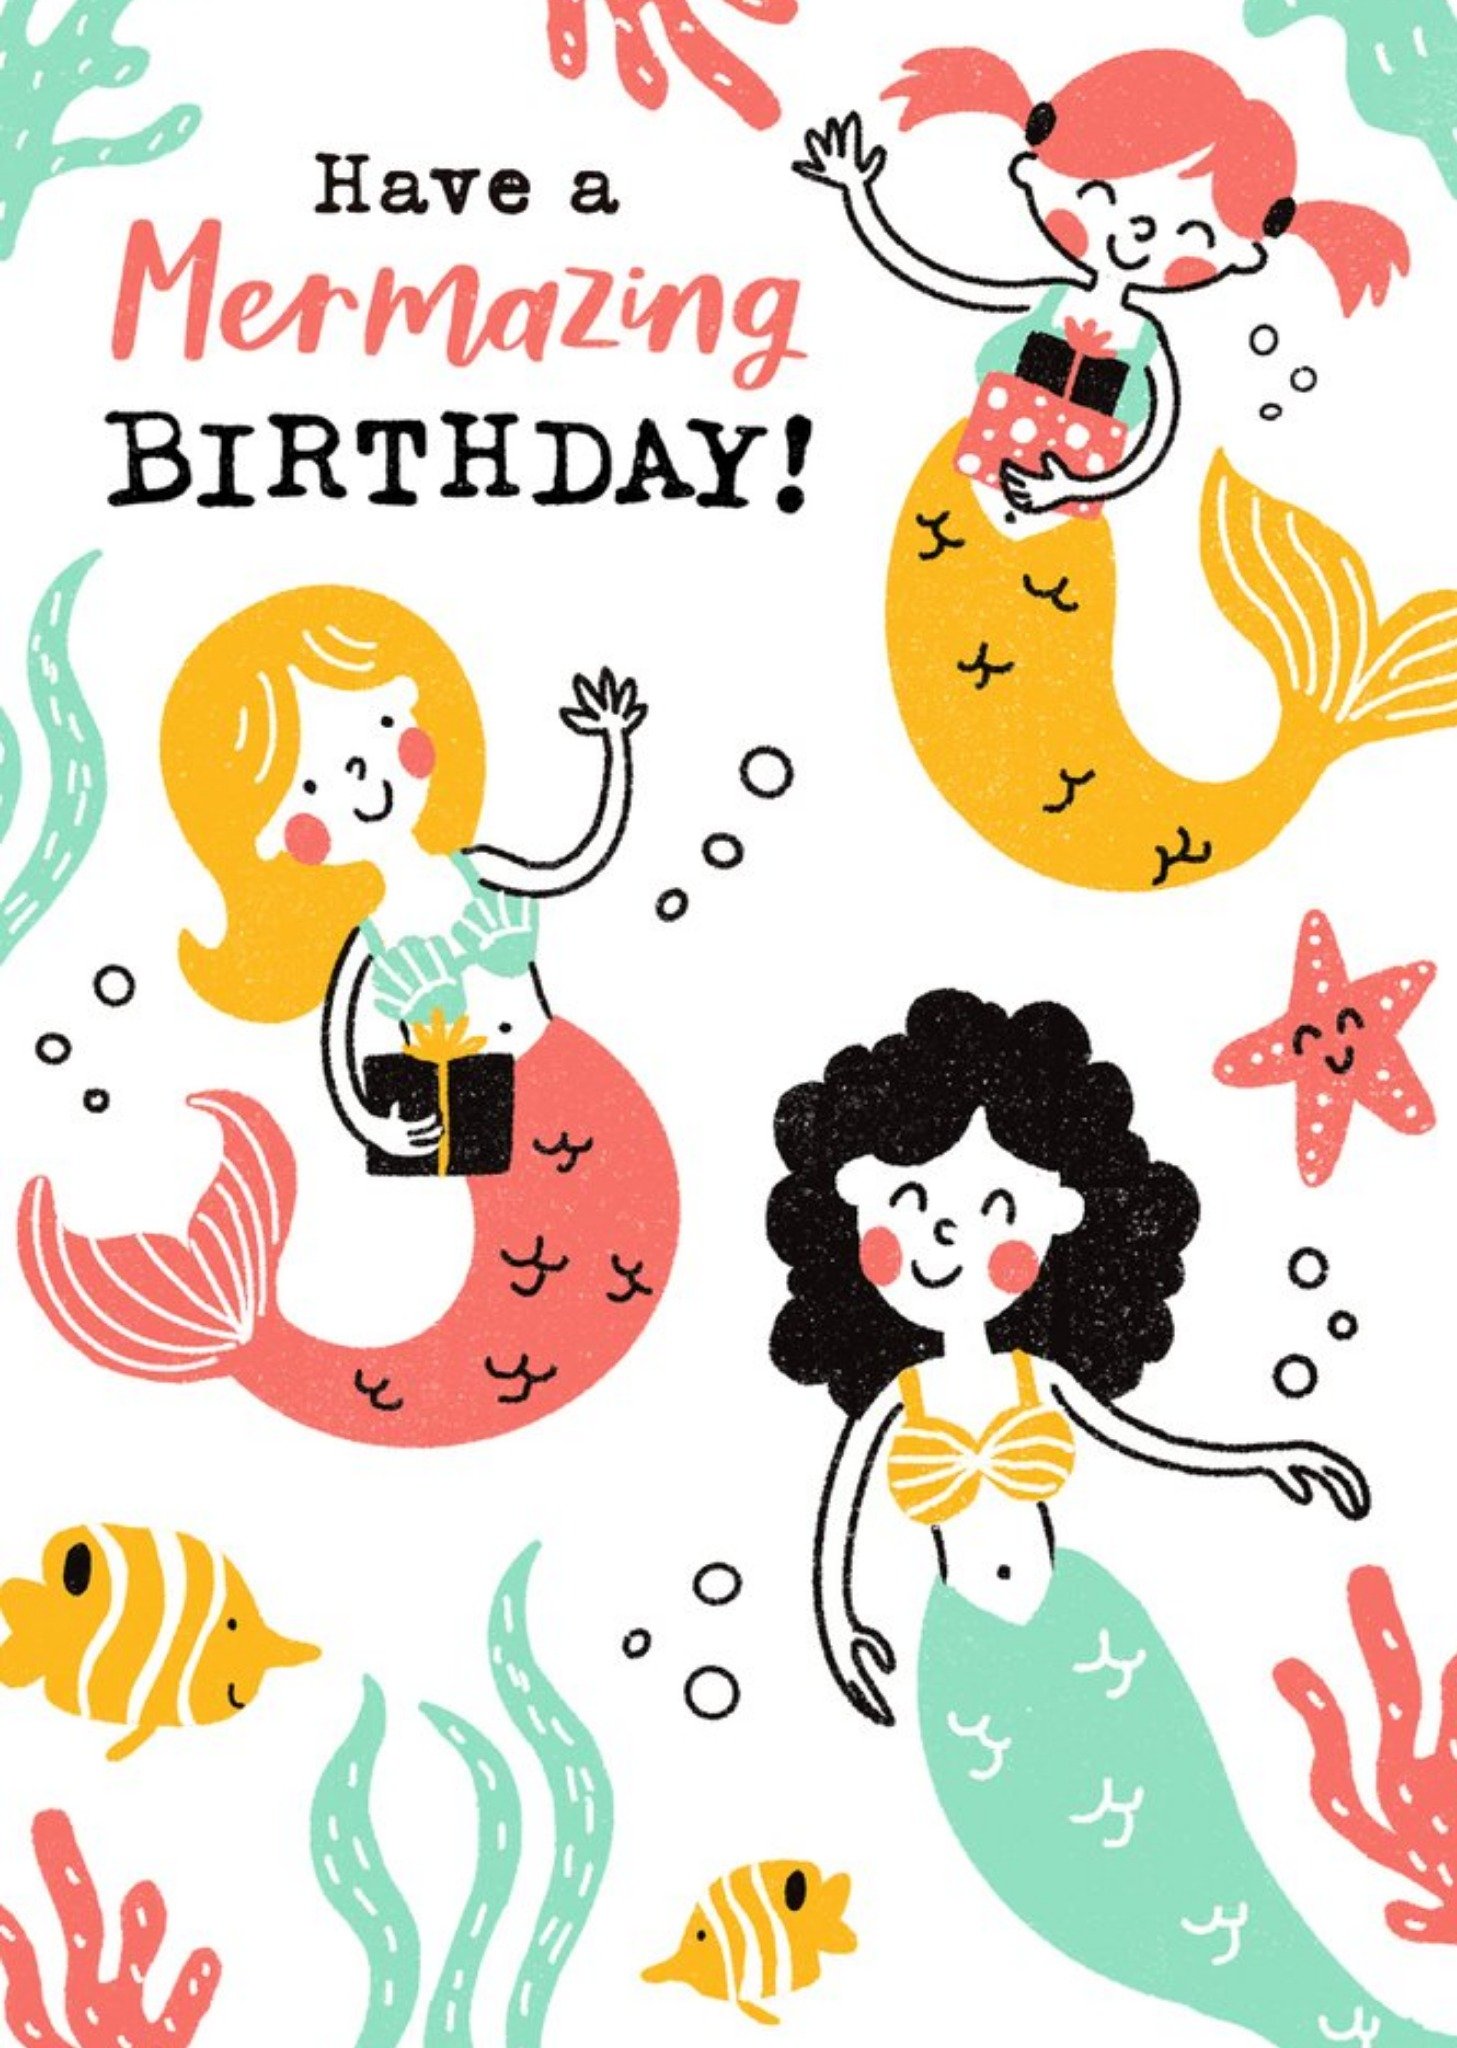 Moonpig Bright Illustration Of Mermaids And Fish Have A Mermazing Birthday Card, Large